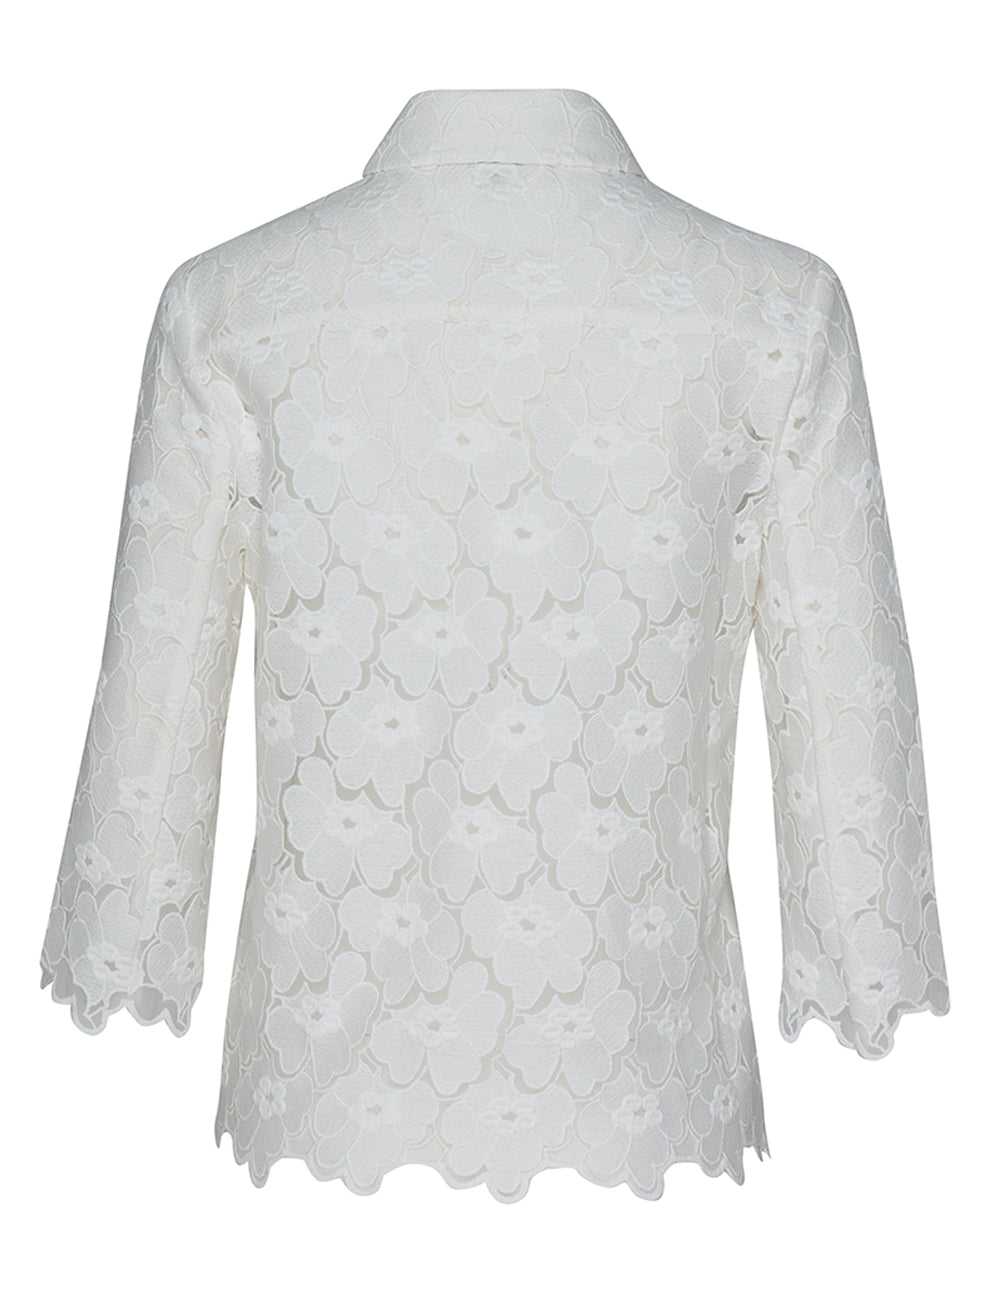 Club21 Collection Floral Lace Patch Shirt (White)